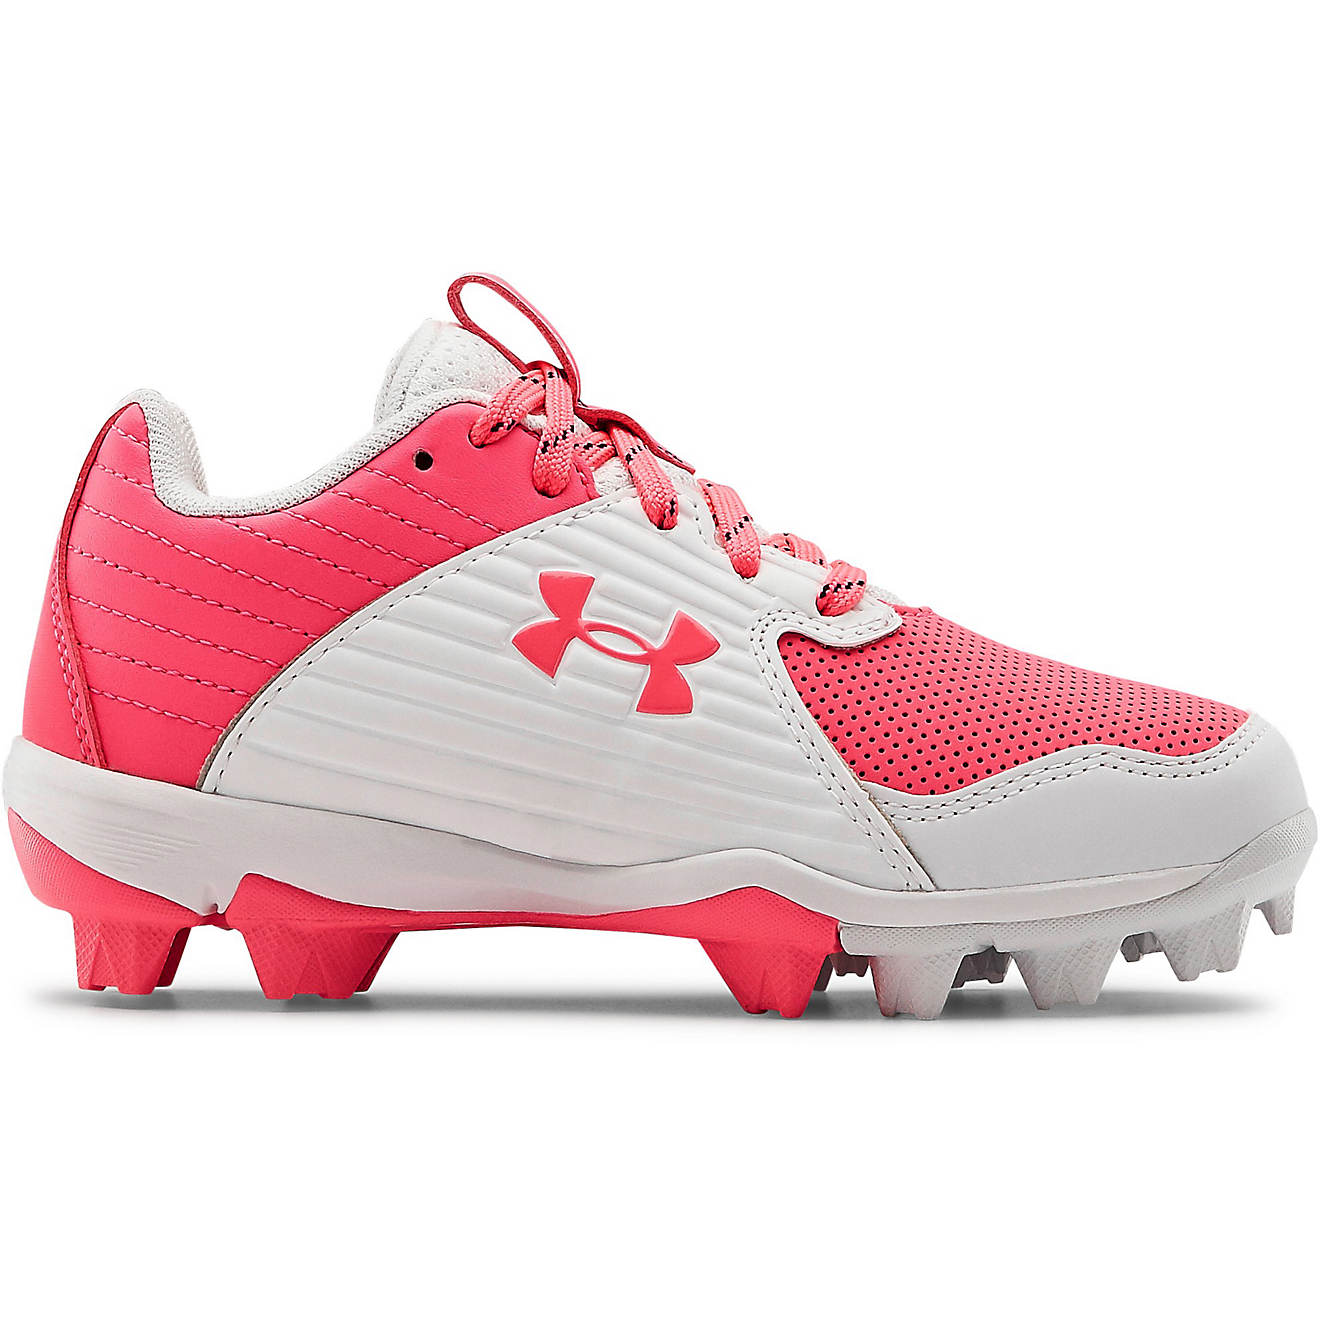 Under Armour Youth Leadoff Low Molded Baseball Cleats 